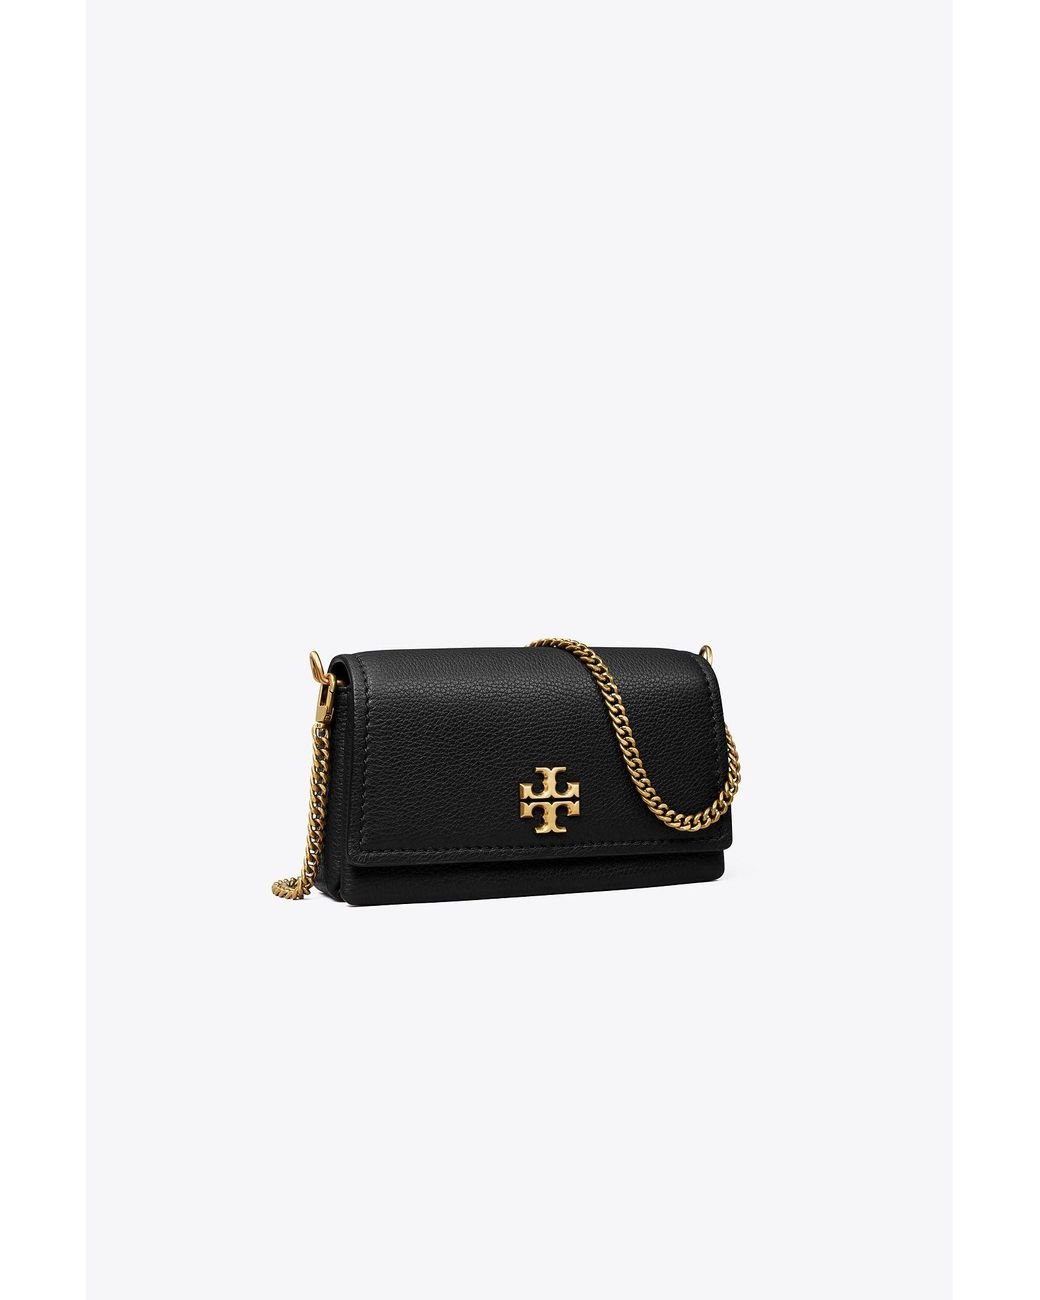 Tory Burch Limited-edition Mini Bag in Black